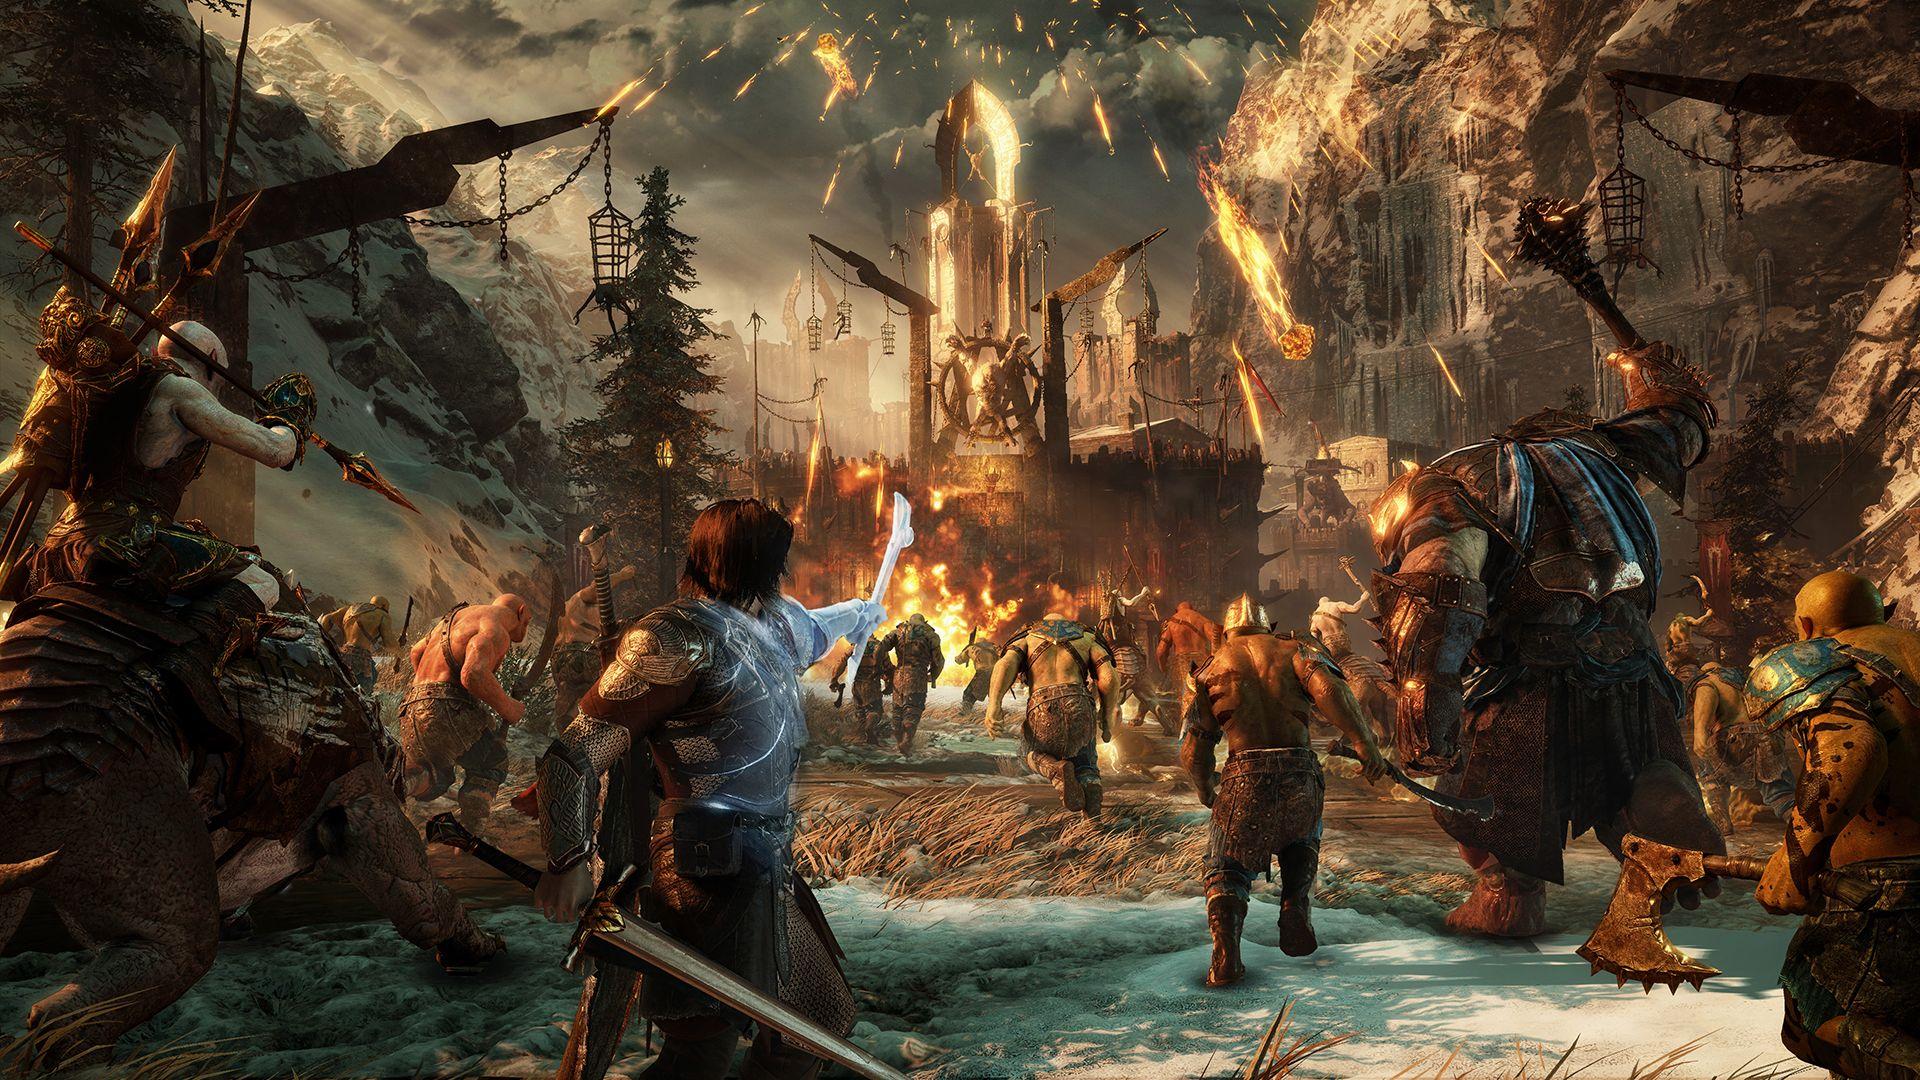 How Bad Are The Loot Boxes In Middle Earth: Shadow Of War?